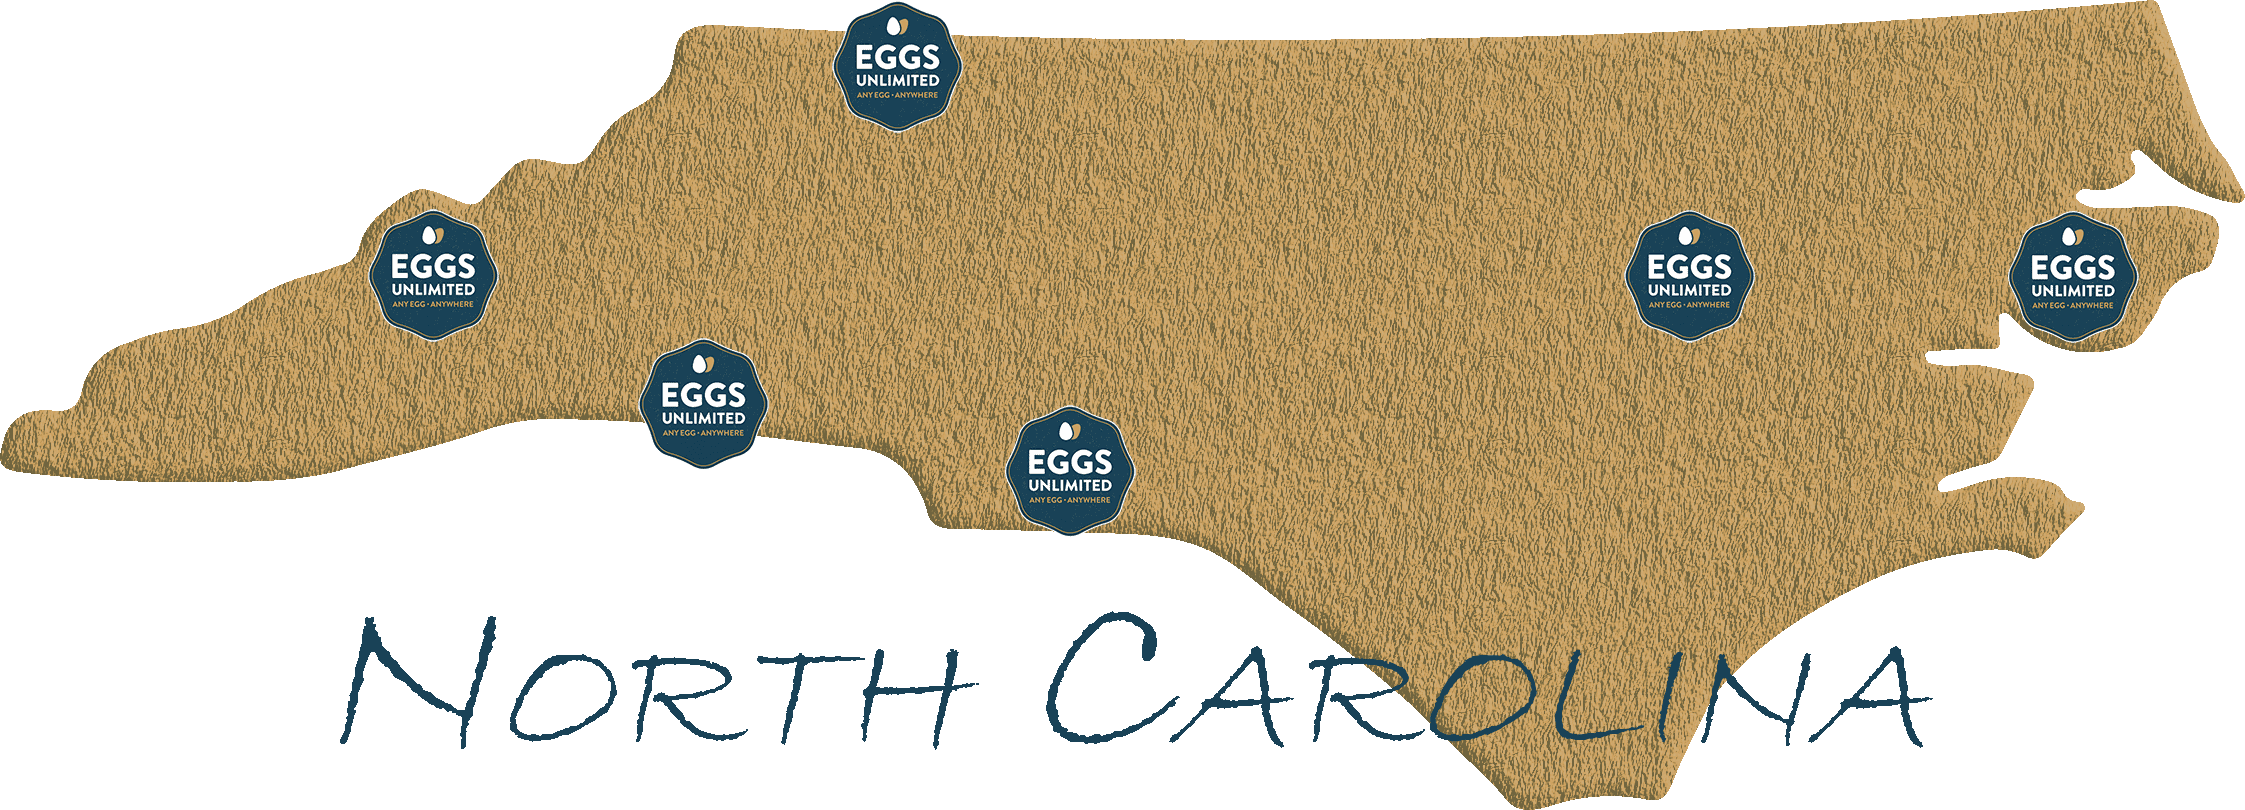 Eggs-Unlimited-is-one-of-the-leading-suppliers-of-eggs-in-North-Carolina.-Our-partnerships-with-domestic-and-international-egg-producers-enable-us-to-service-all-your-egg-needs